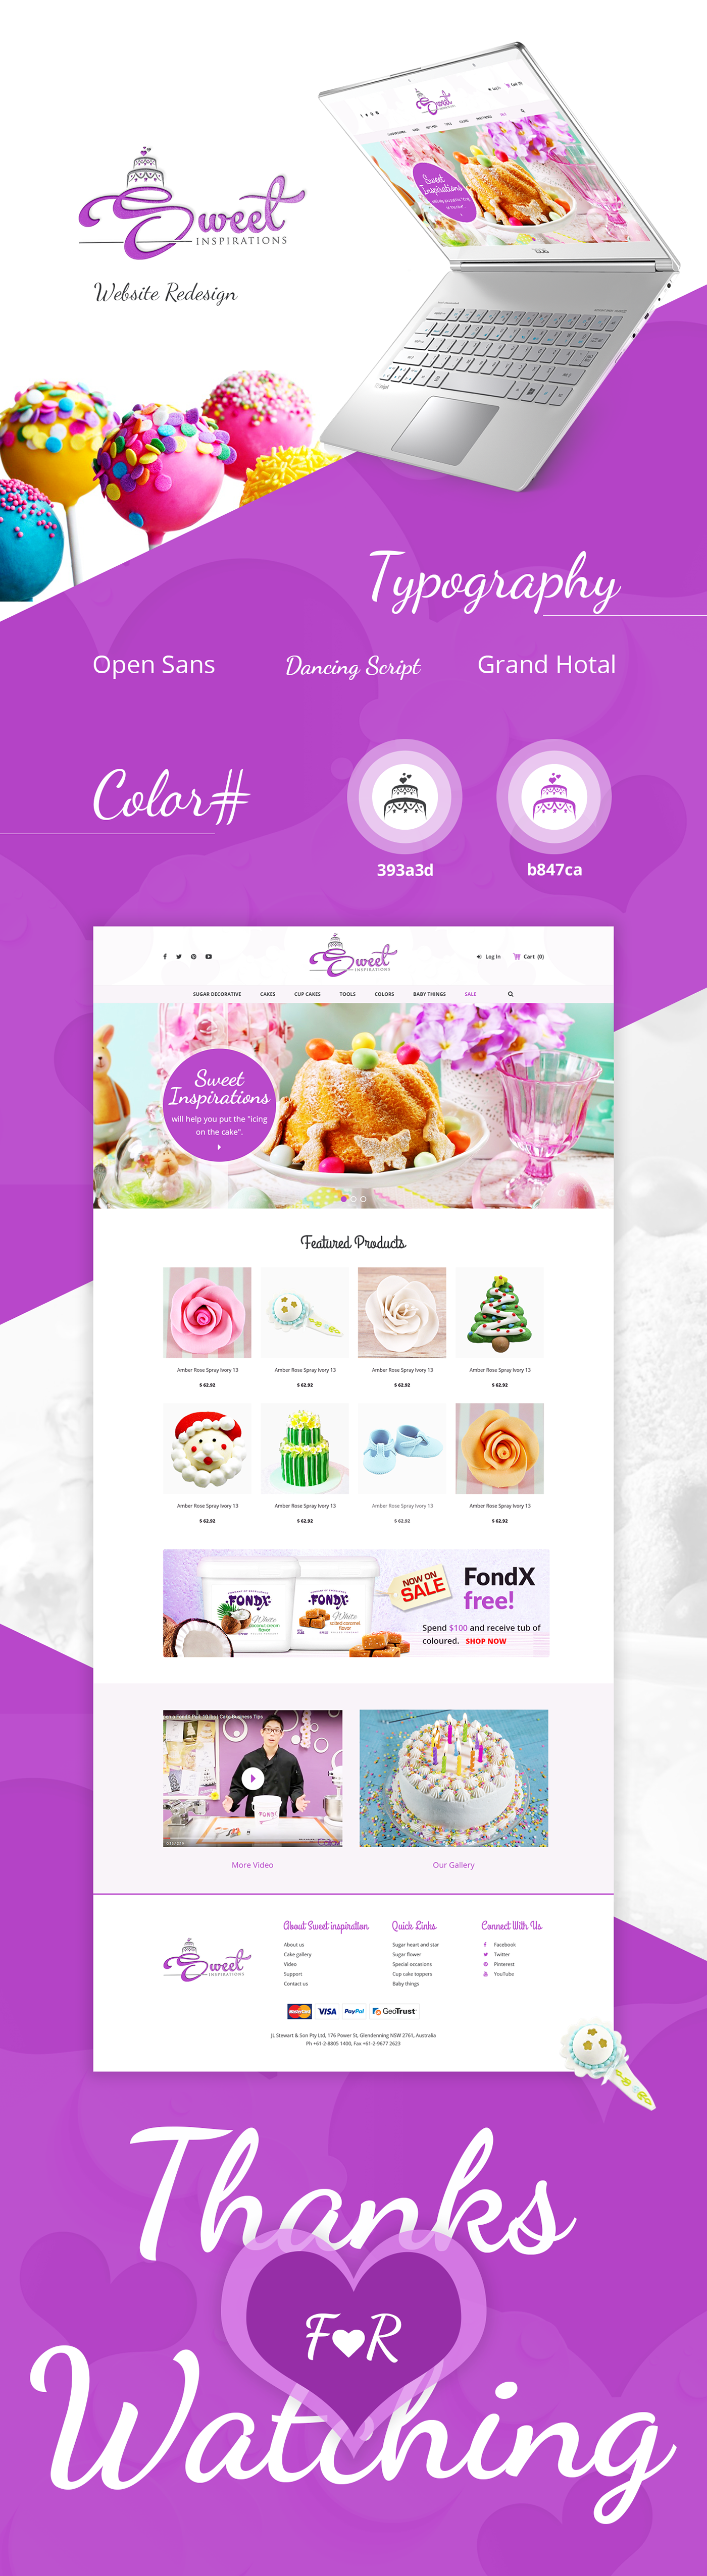 bakery products Australia homepage online store